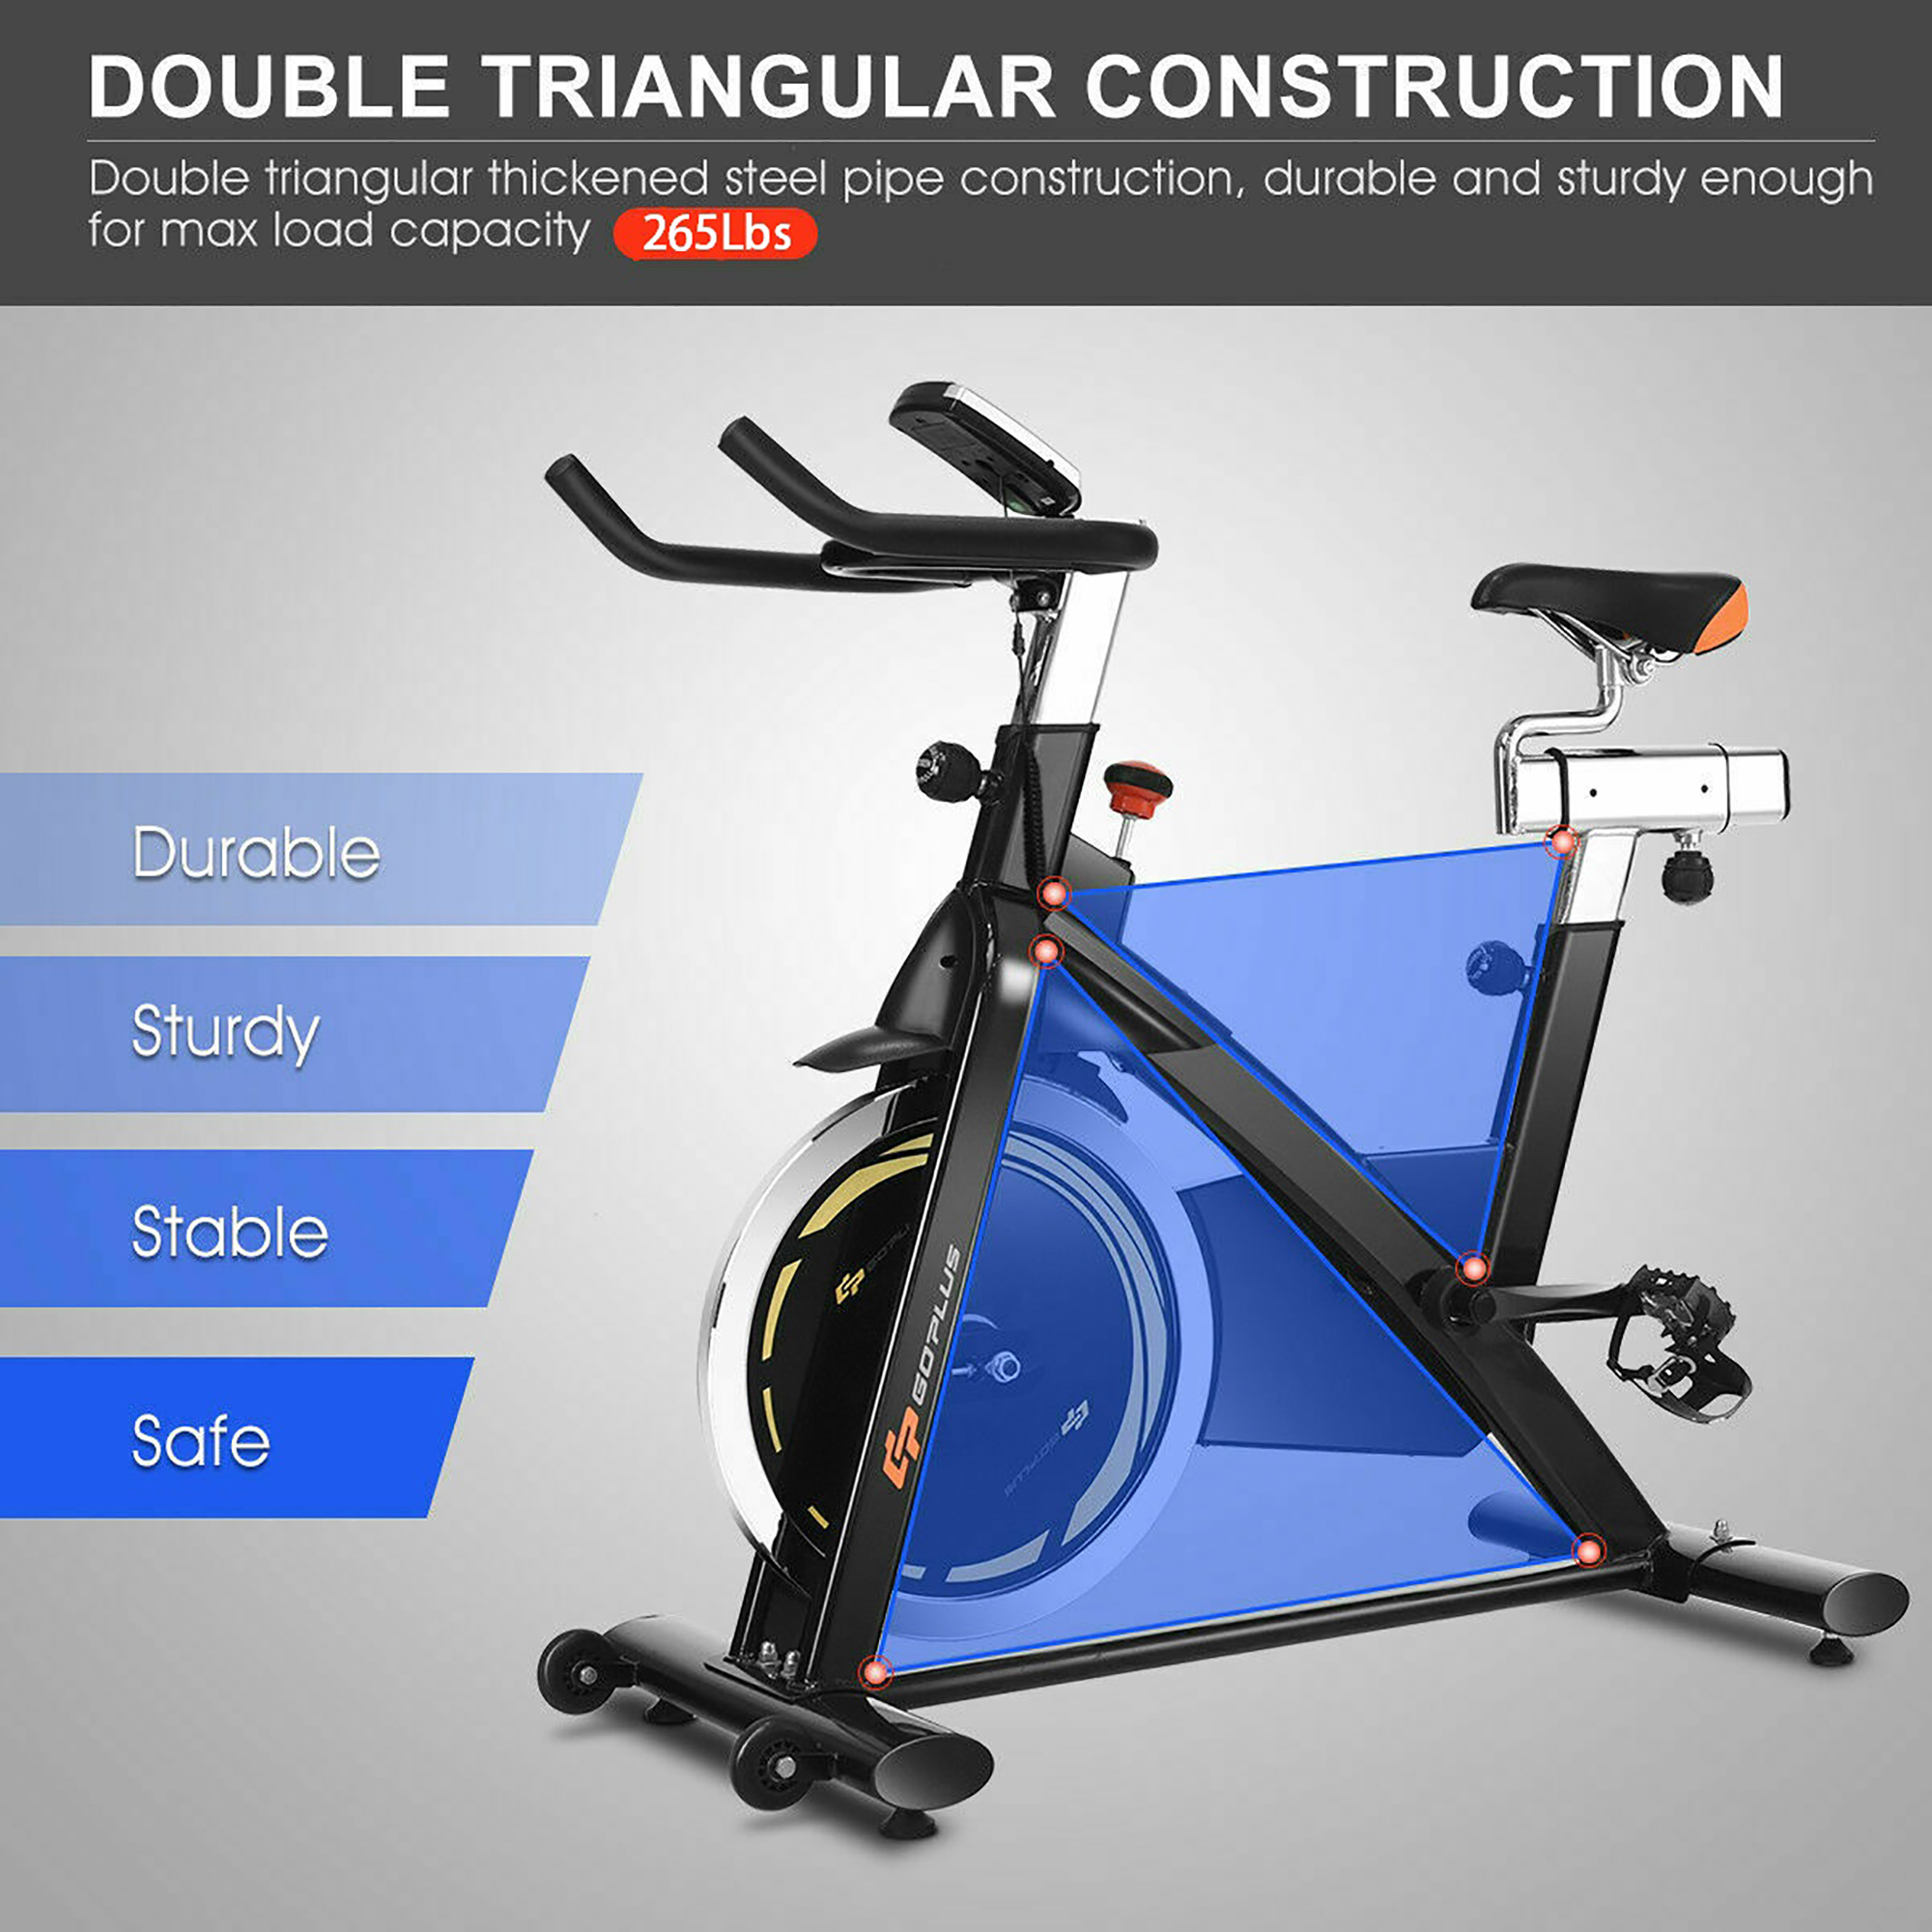 Goplus Exercise Bike Cycle Trainer Indoor Workout Cardio Fitness Bicycle Stationary - image 5 of 10